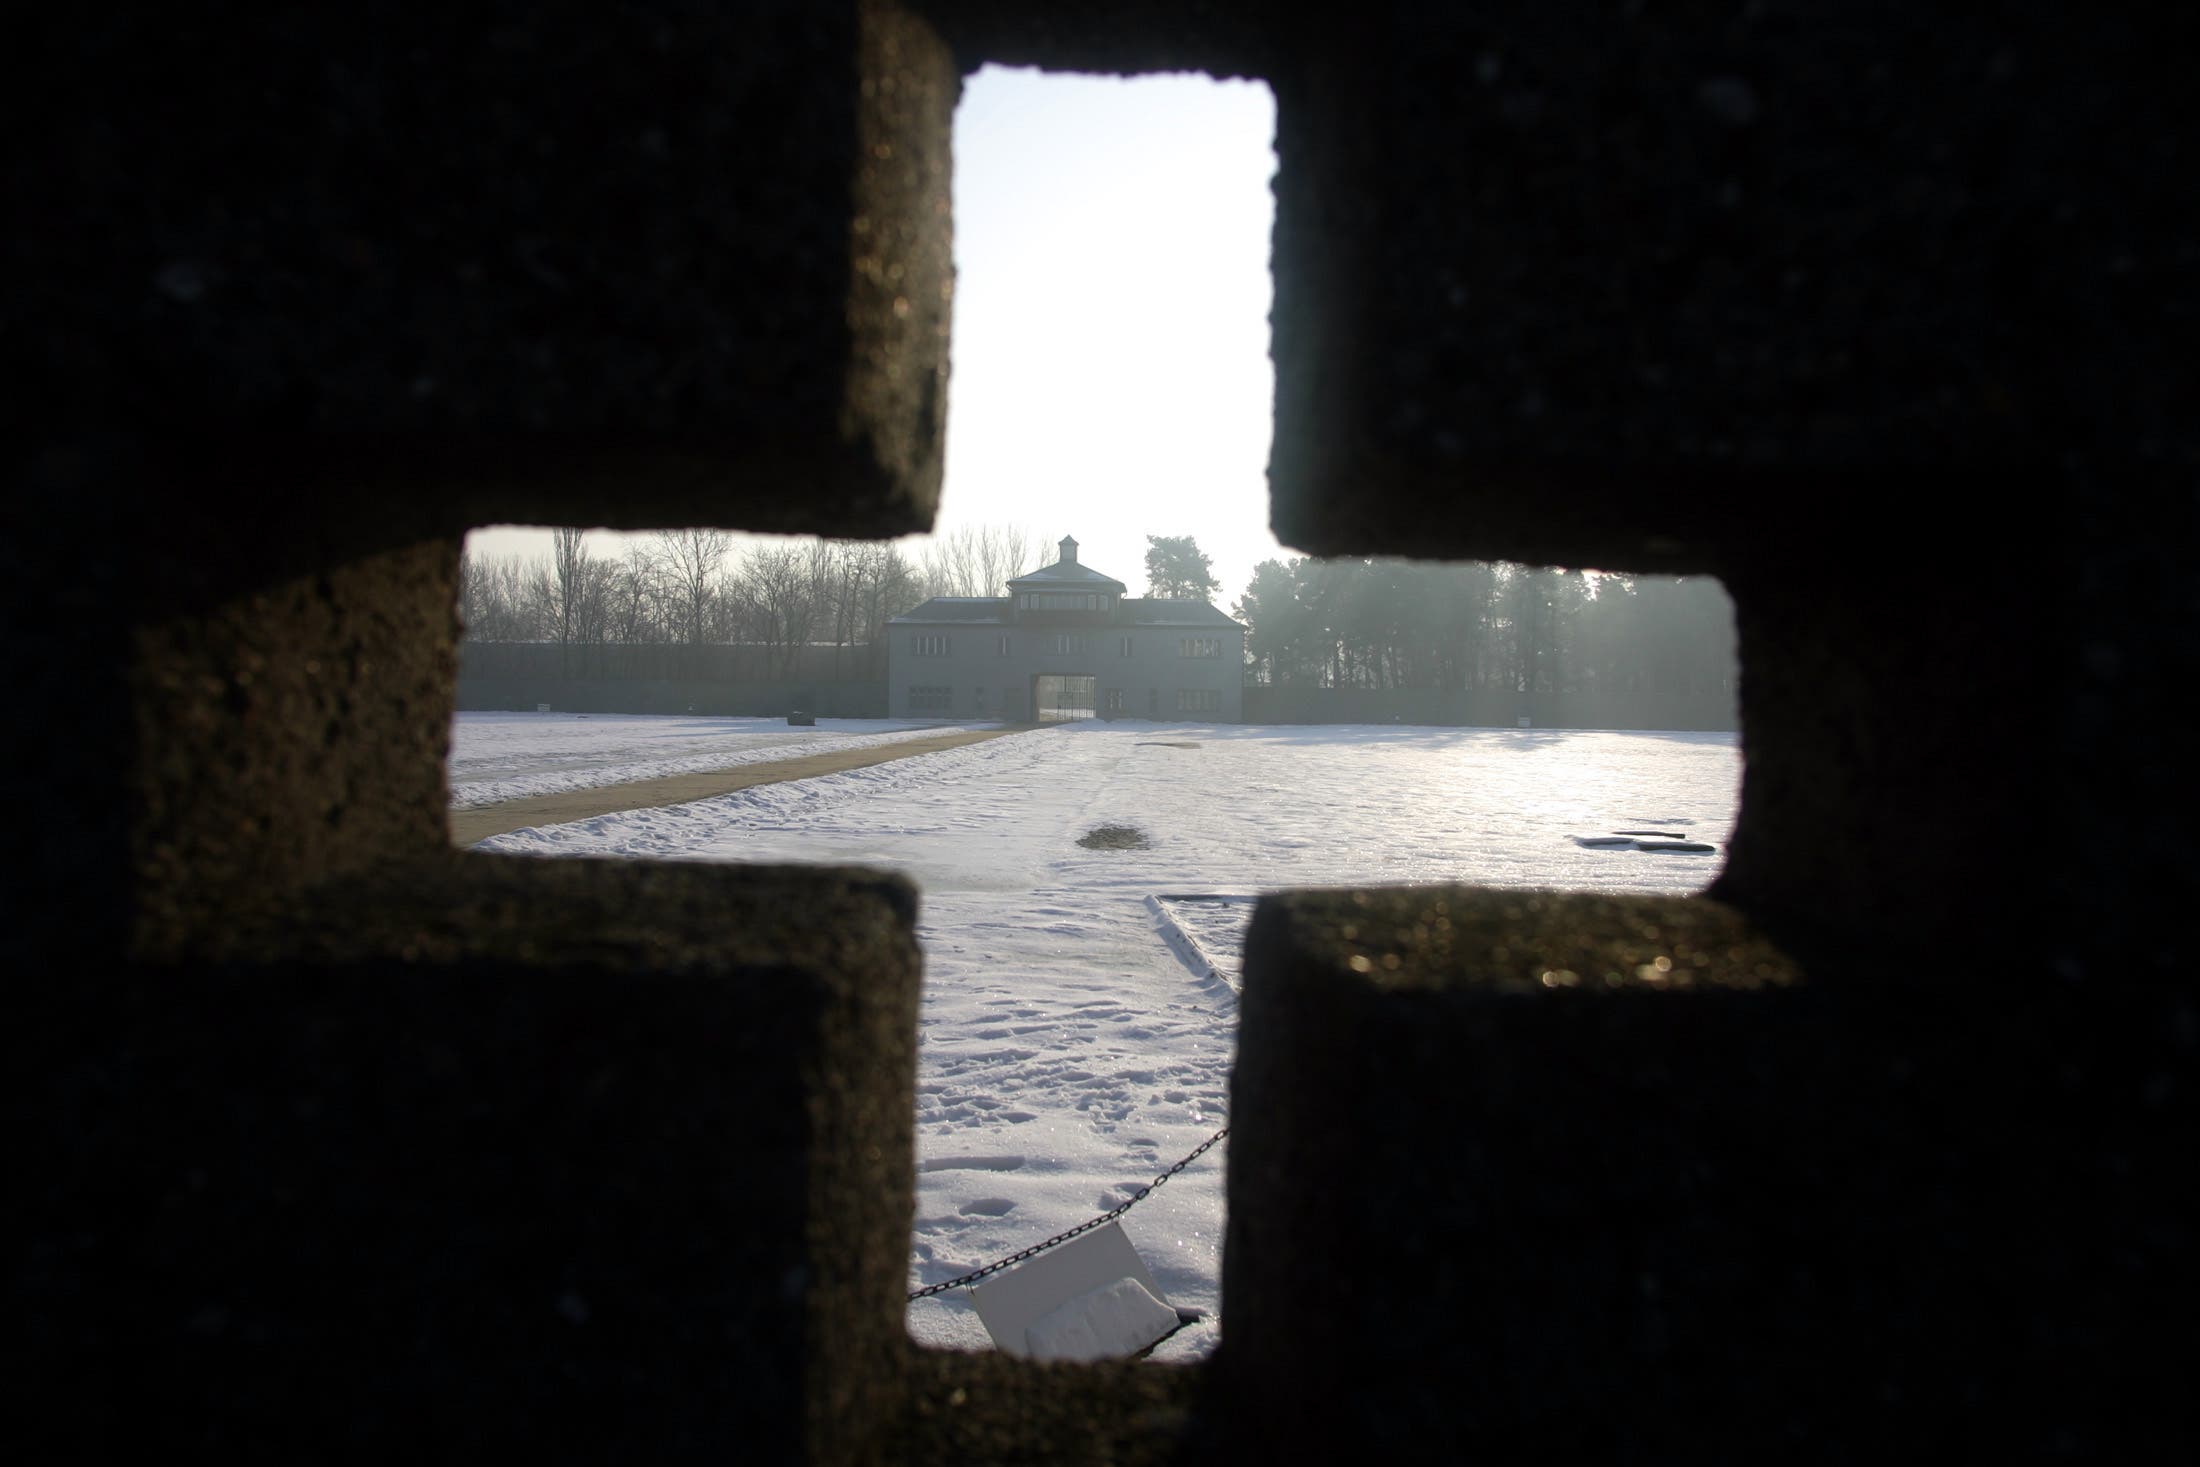 The entrance of the former Nazi concentration camp Sachsenhausen is pictured behind a sculpture near the German capital Berlin. (File photo: Reuters)